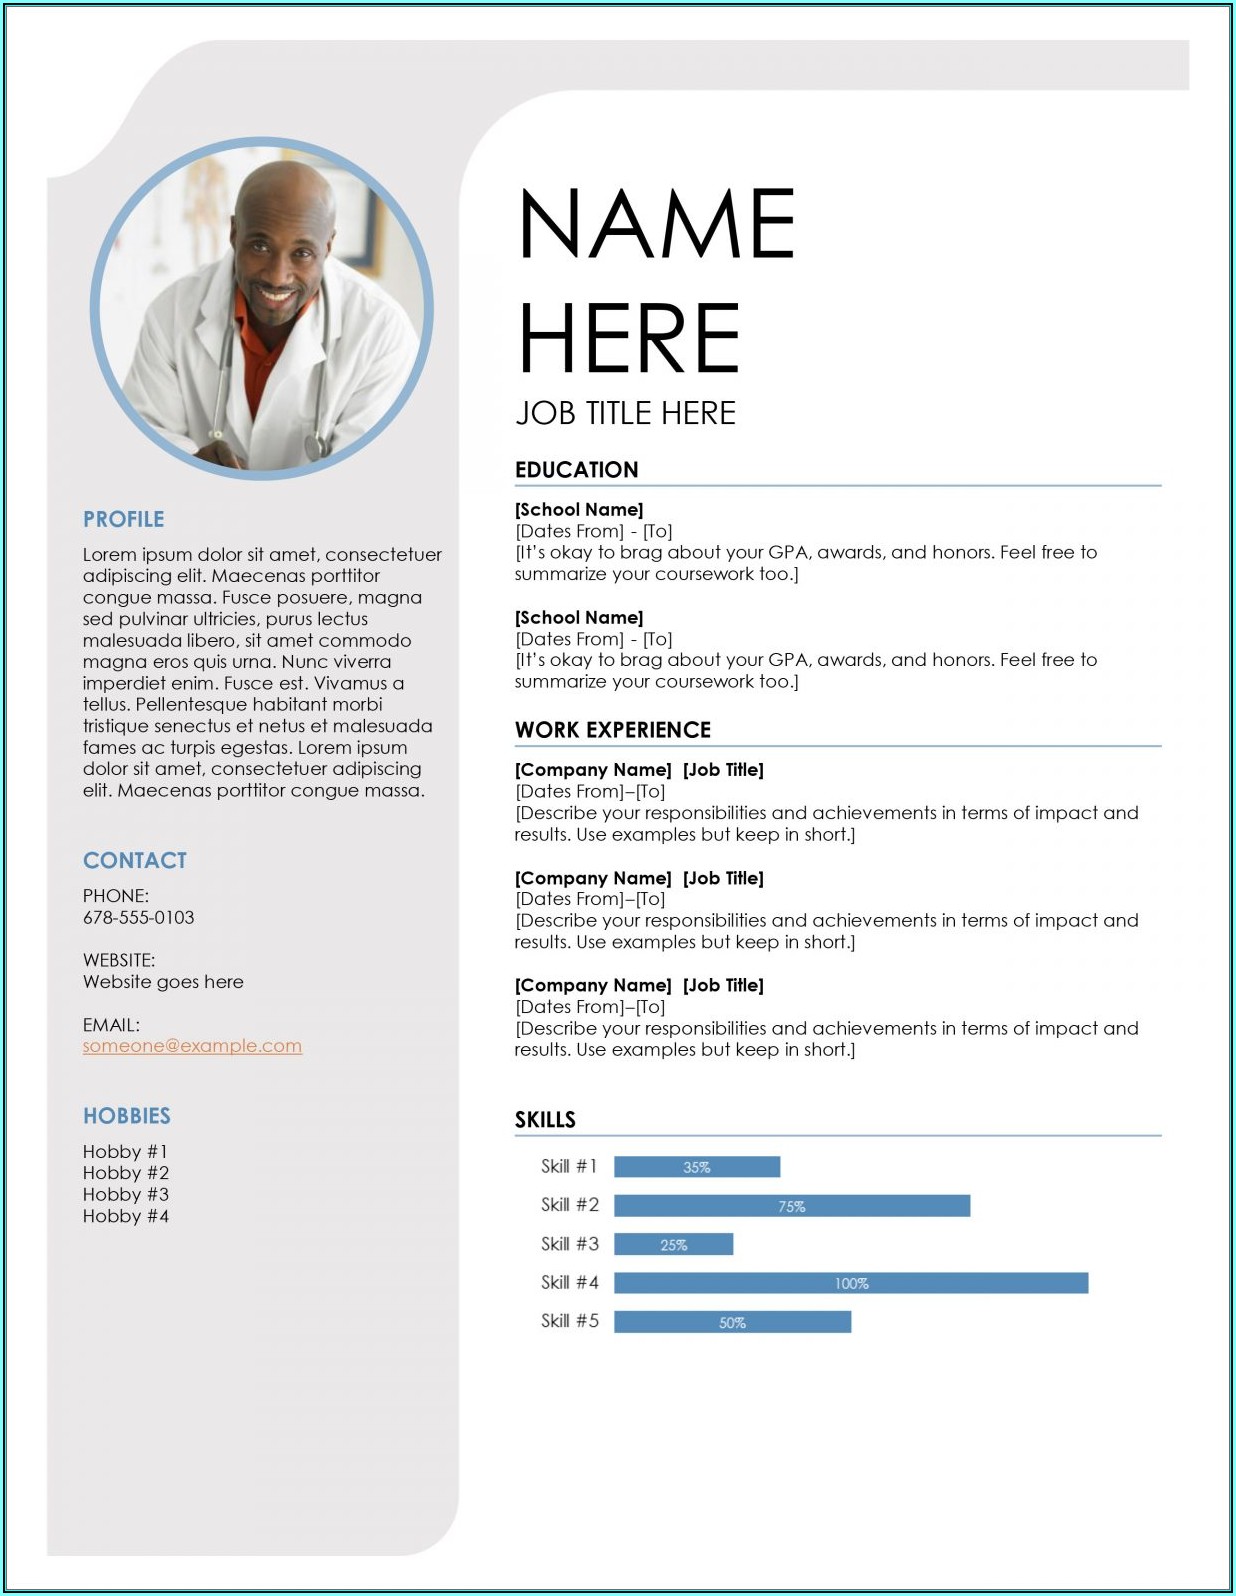 Ms Office Cv Templates Free Download